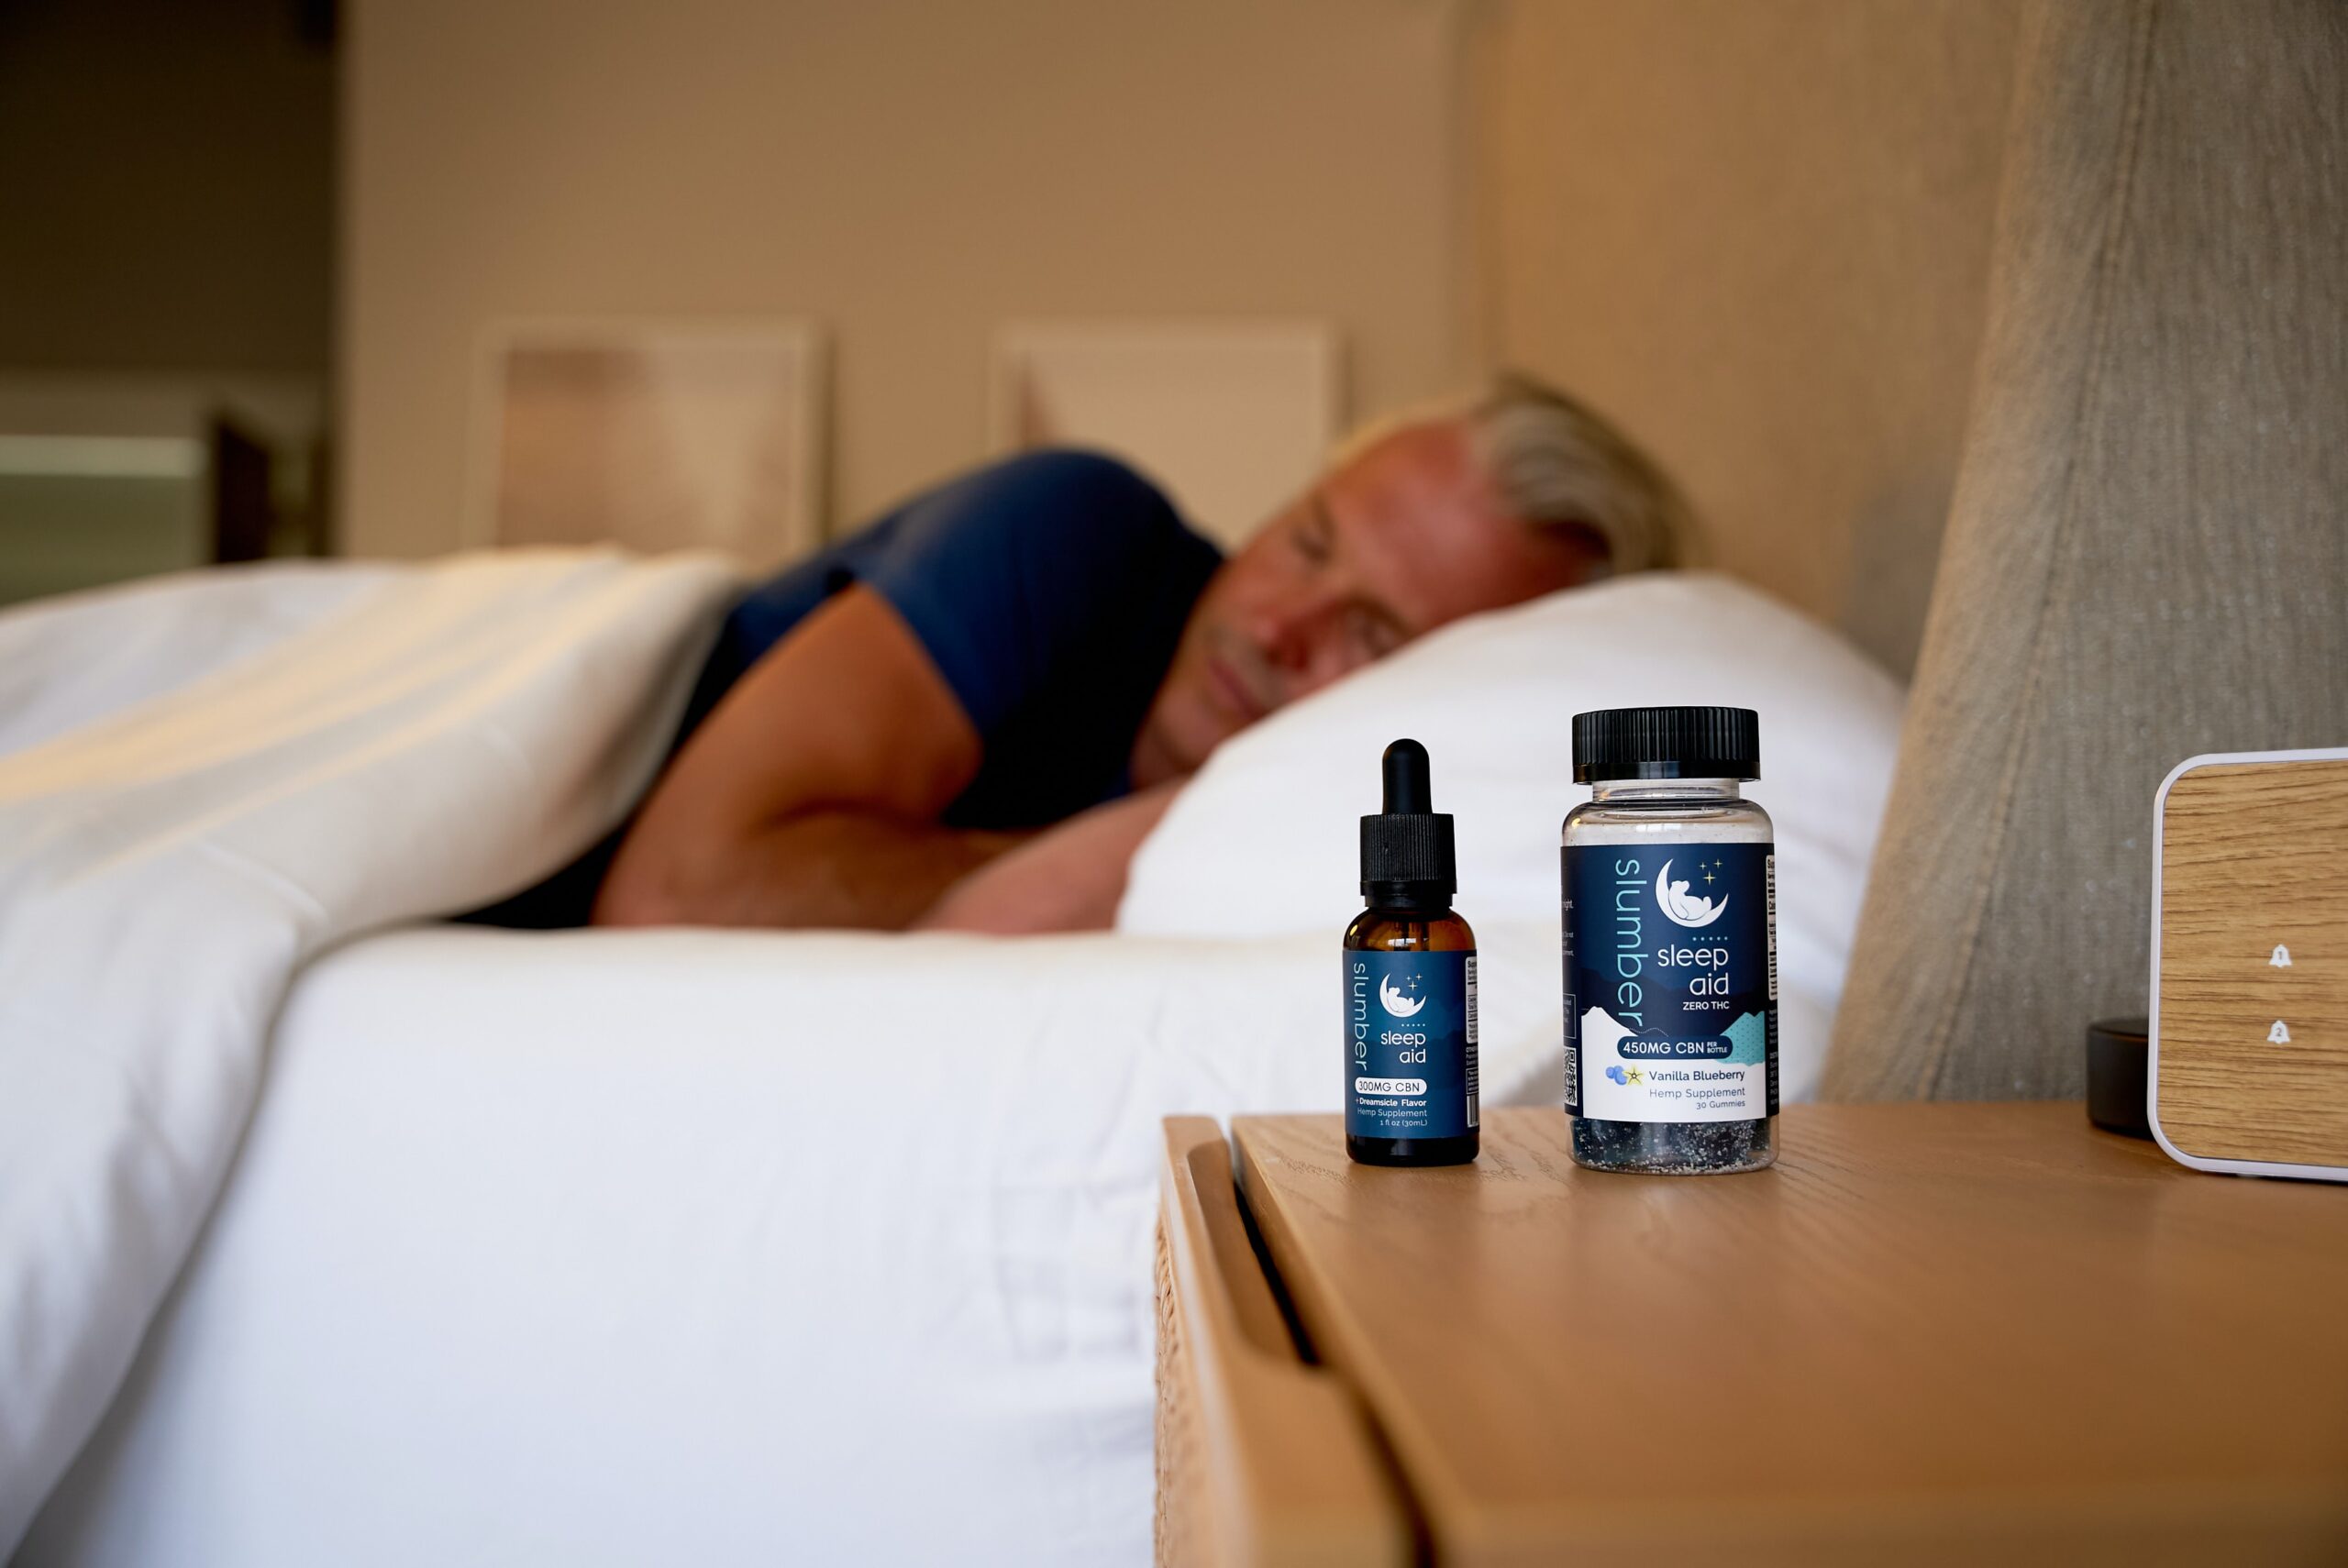 cbn products for sleep